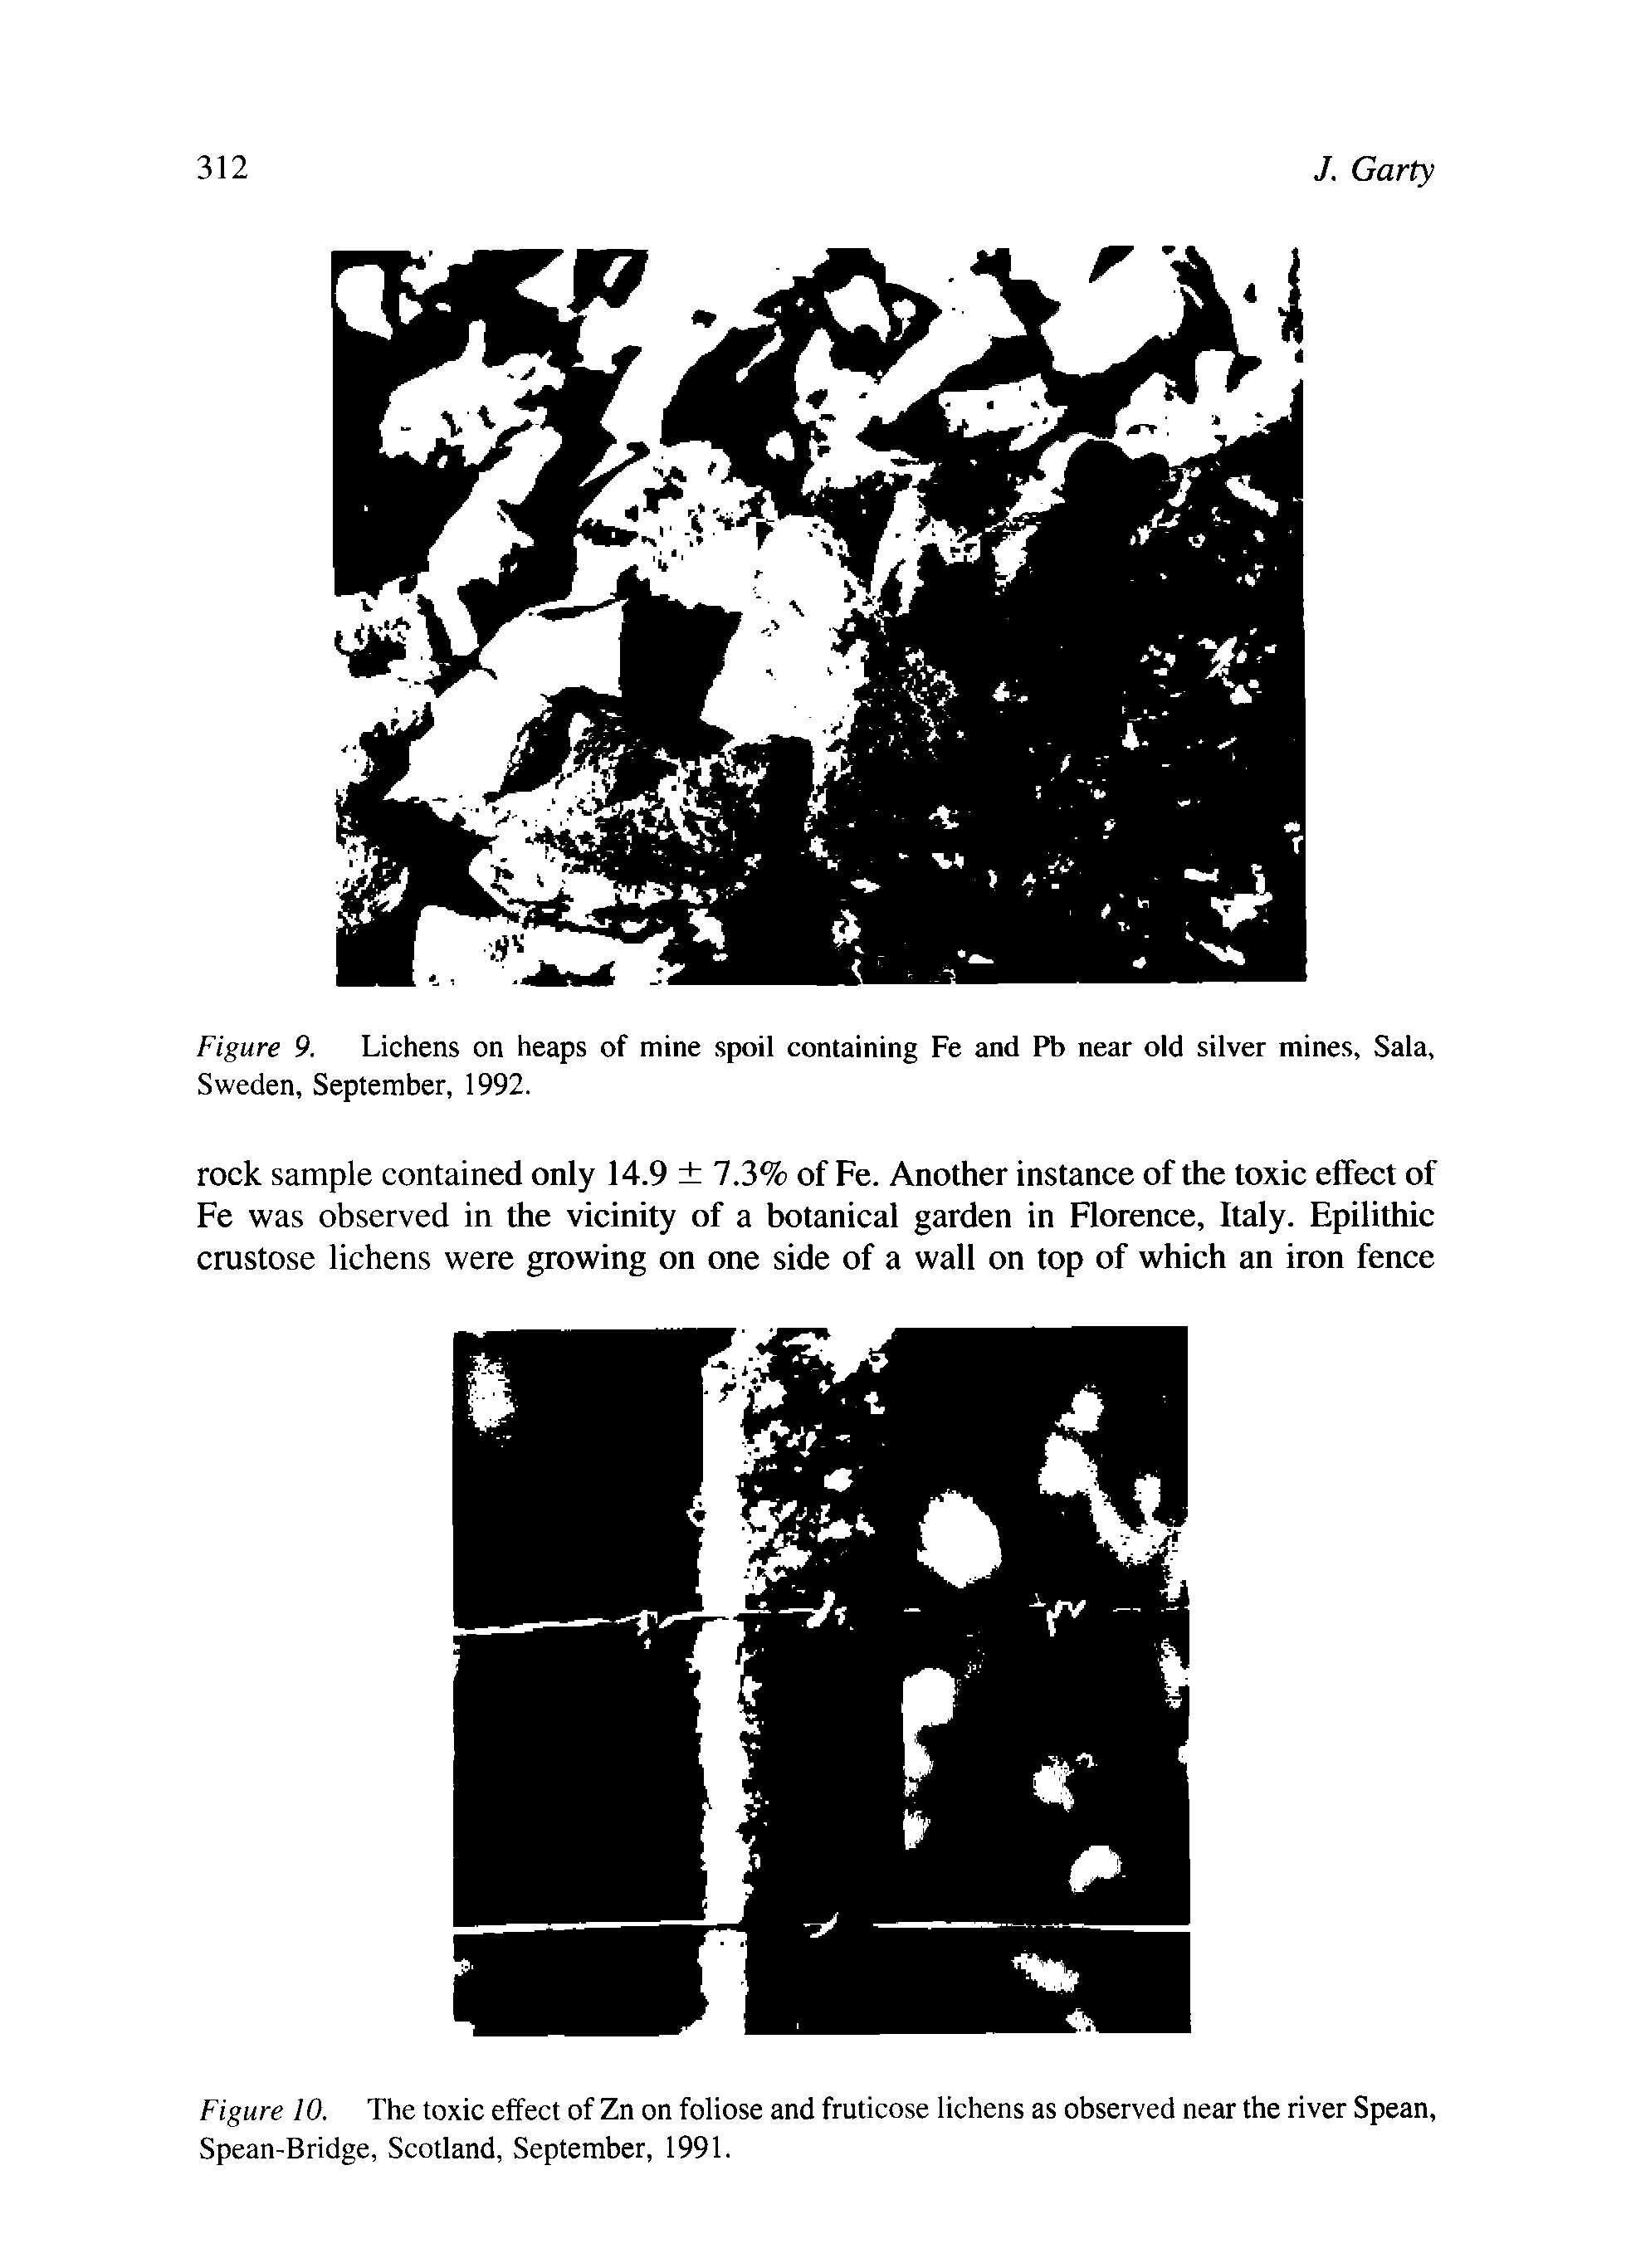 Figure 10. The toxic effect of Zn on foliose and fruticose lichens as observed near the river Spean, Spean-Bridge, Scotland, September, 1991.